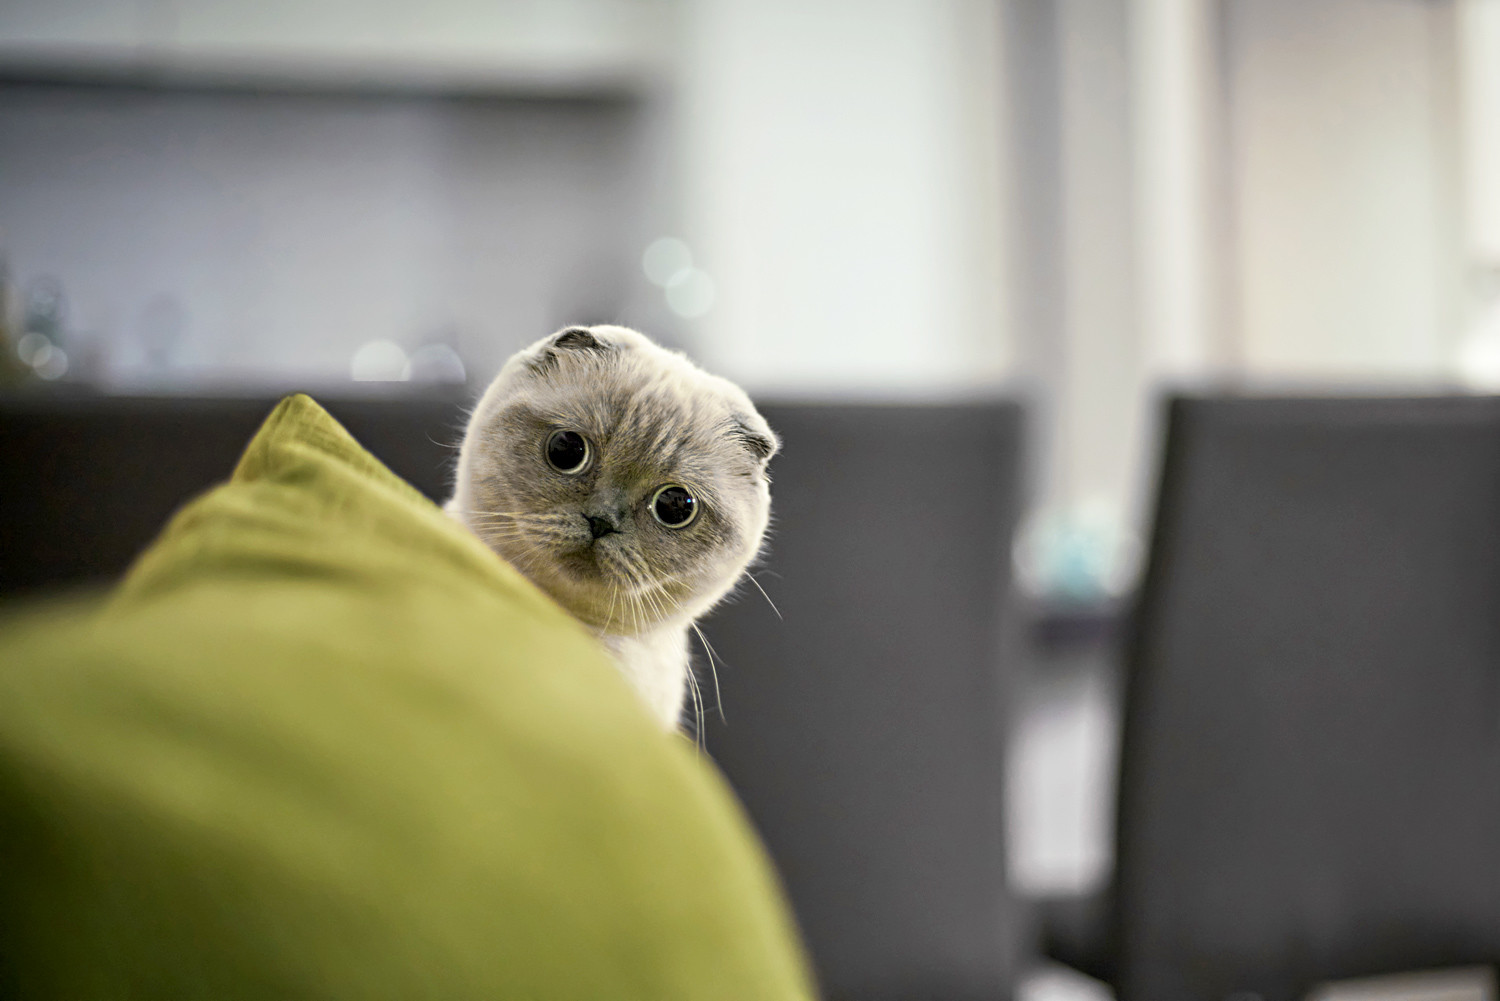 Scottish Fold cats top the searches on Avito.